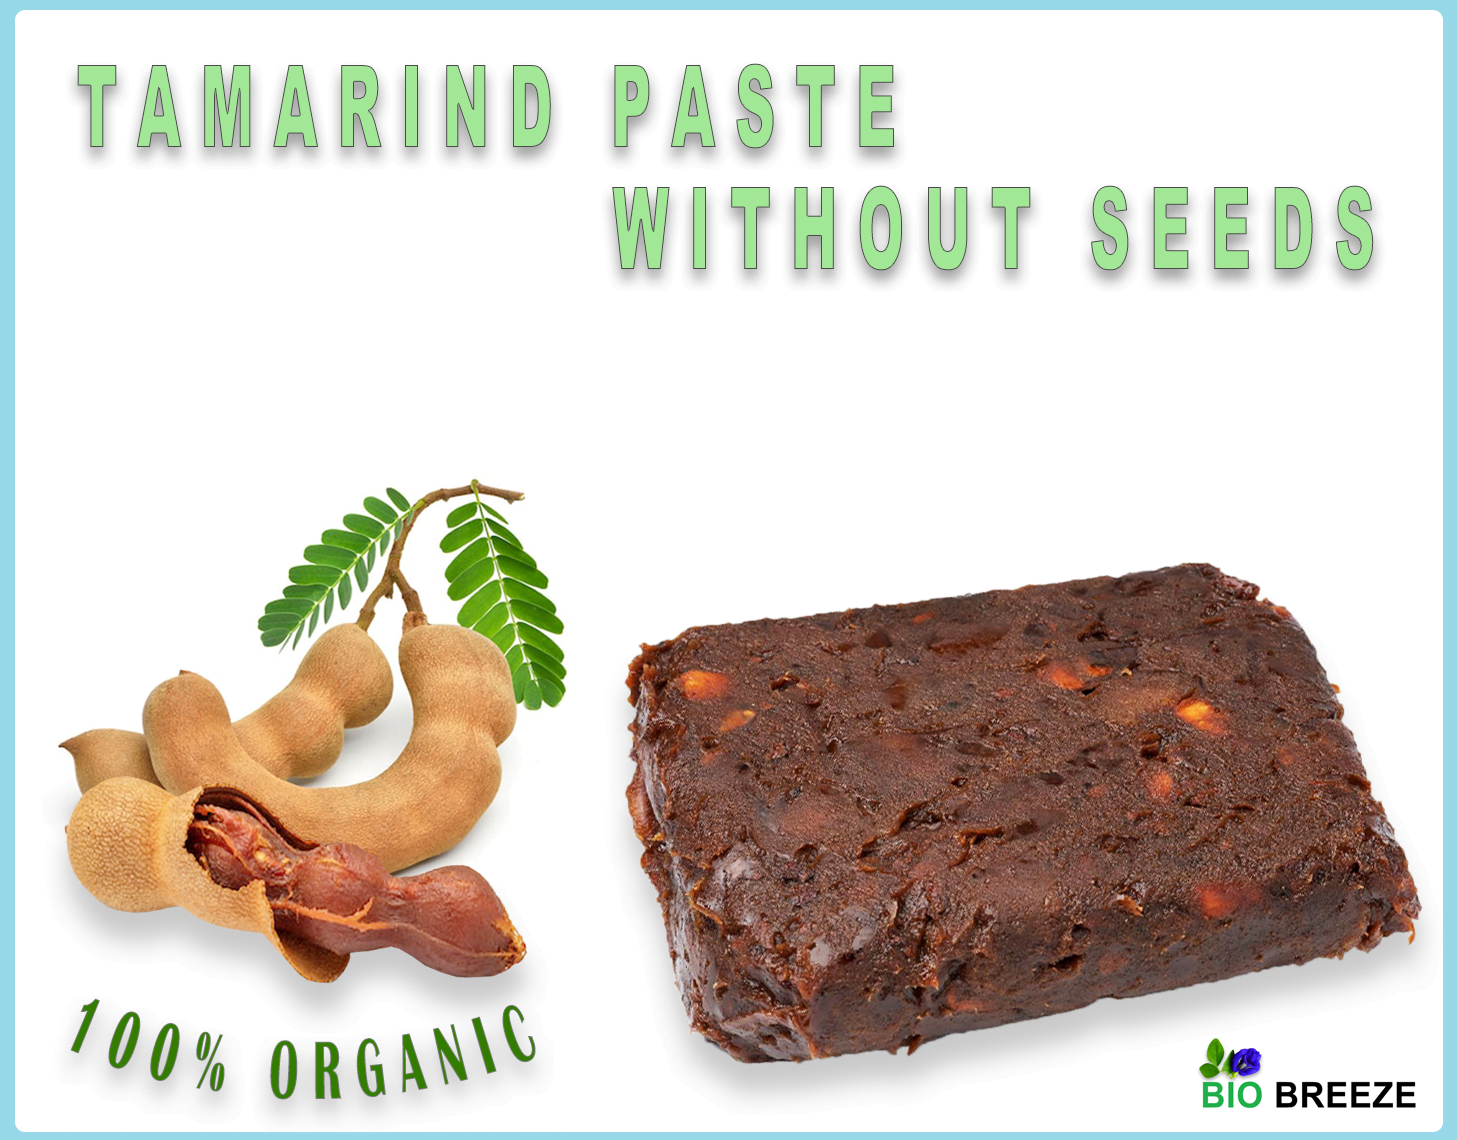 Tamarind paste without seeds